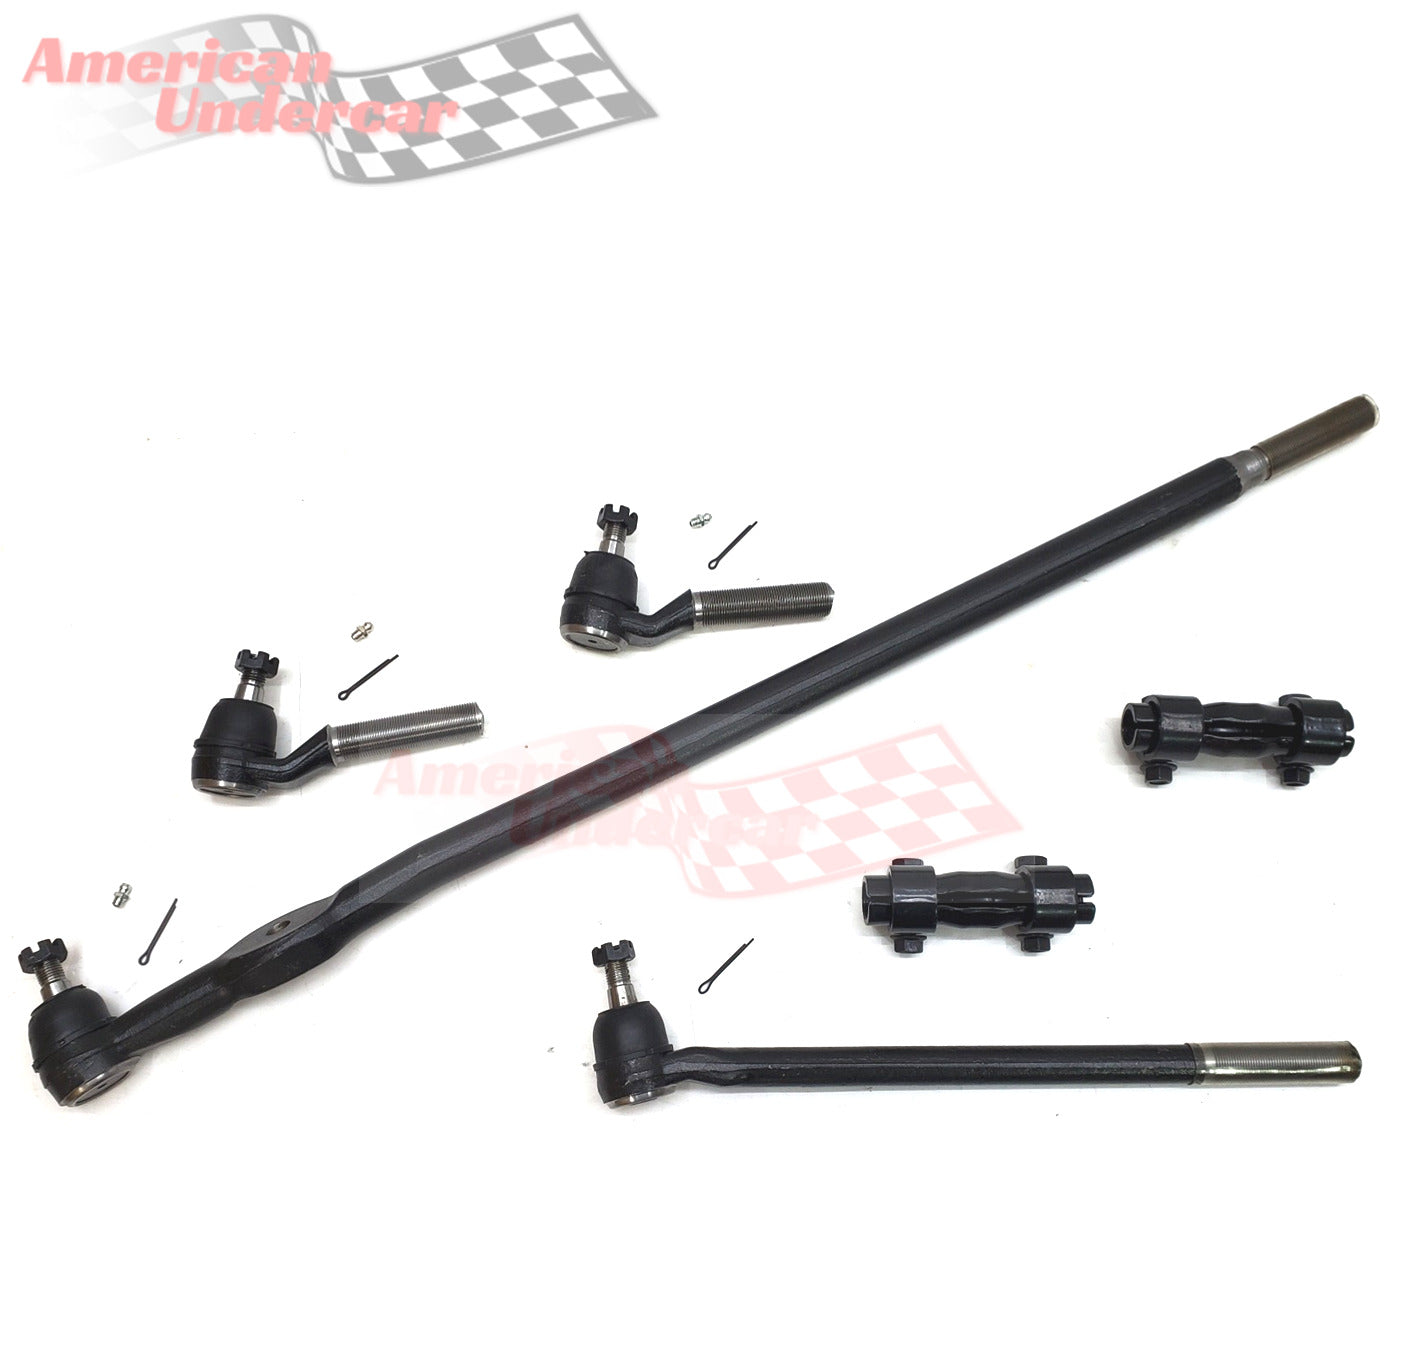 HD Tie Rod Drag Link Sleeve Steering Suspension Kit for 1985-1994 Ford F250 4x4